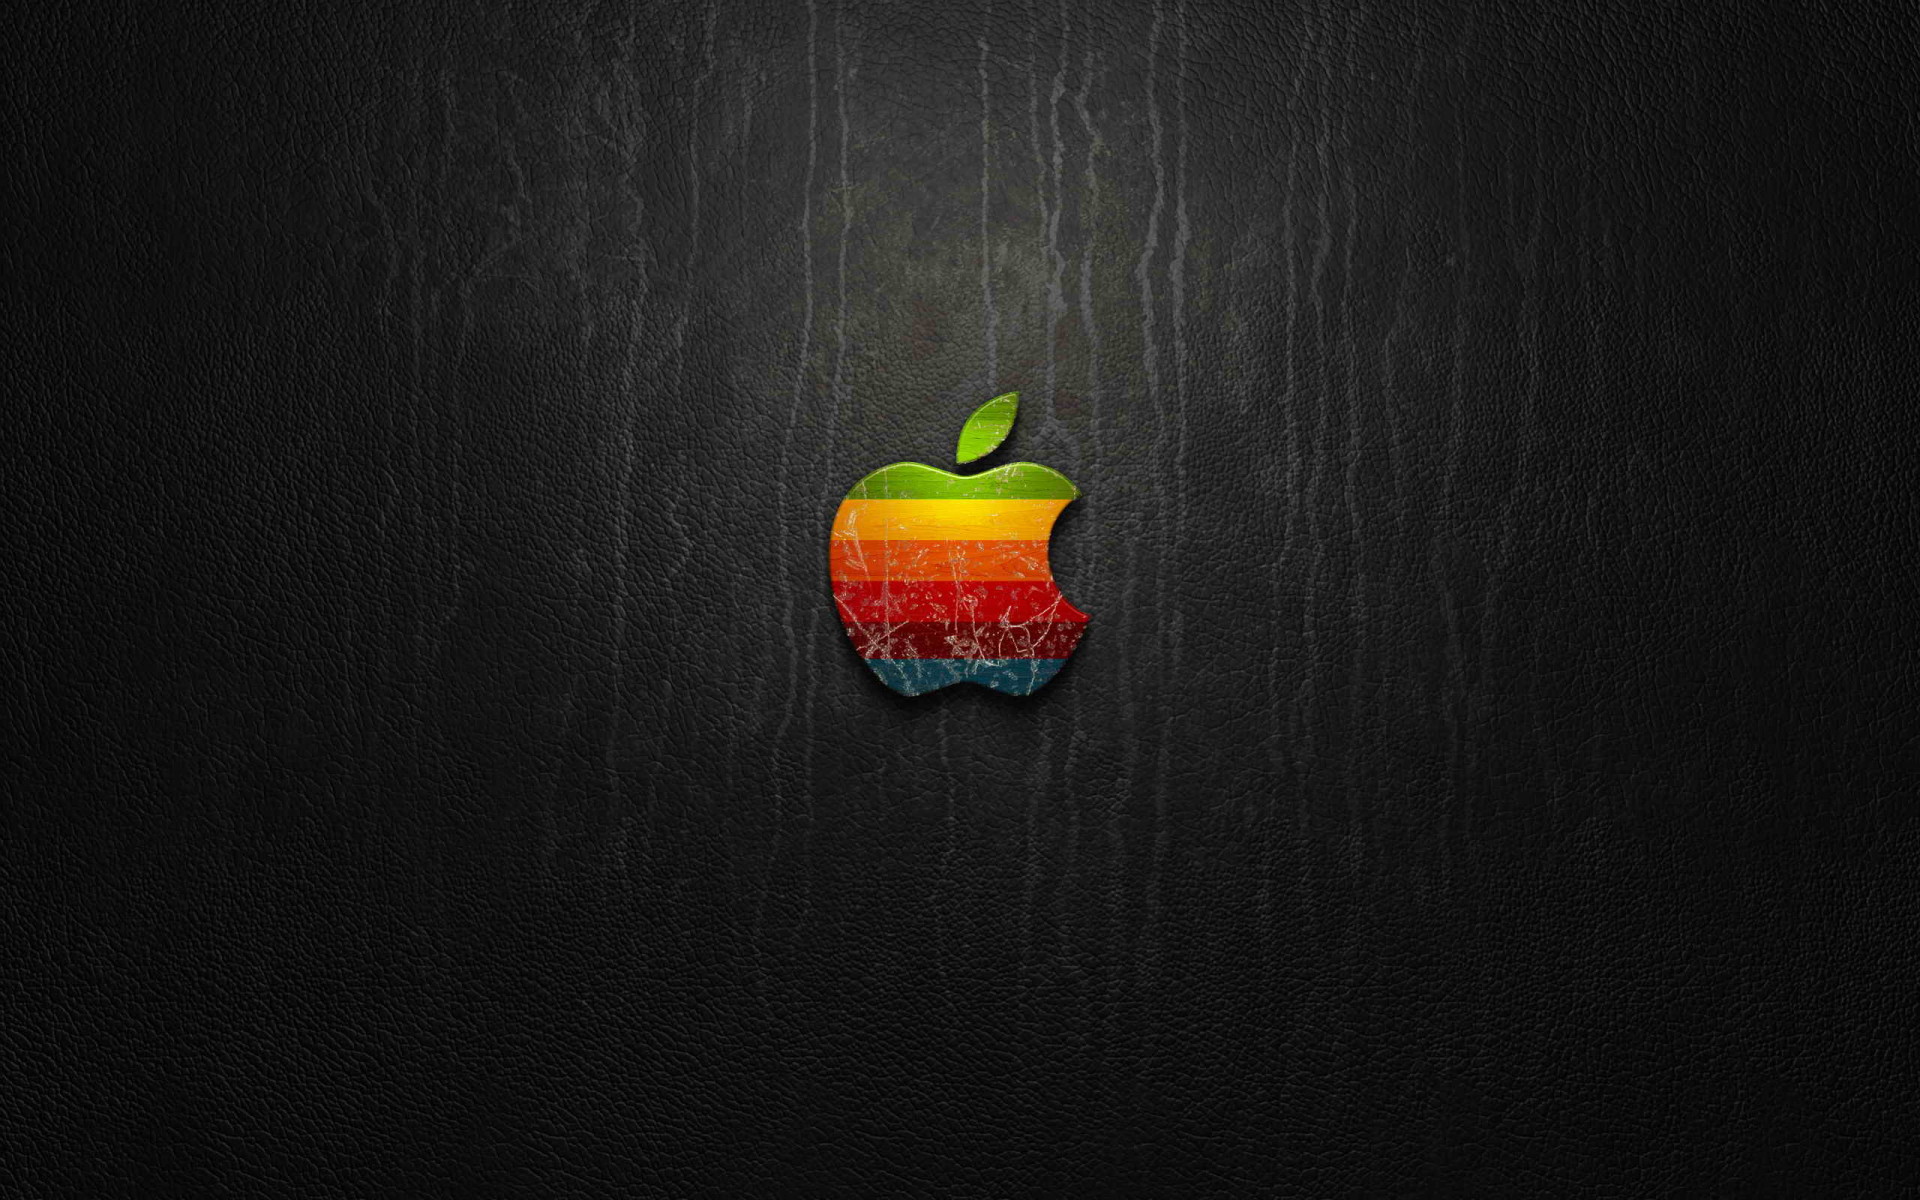 The Apple logo on the leather